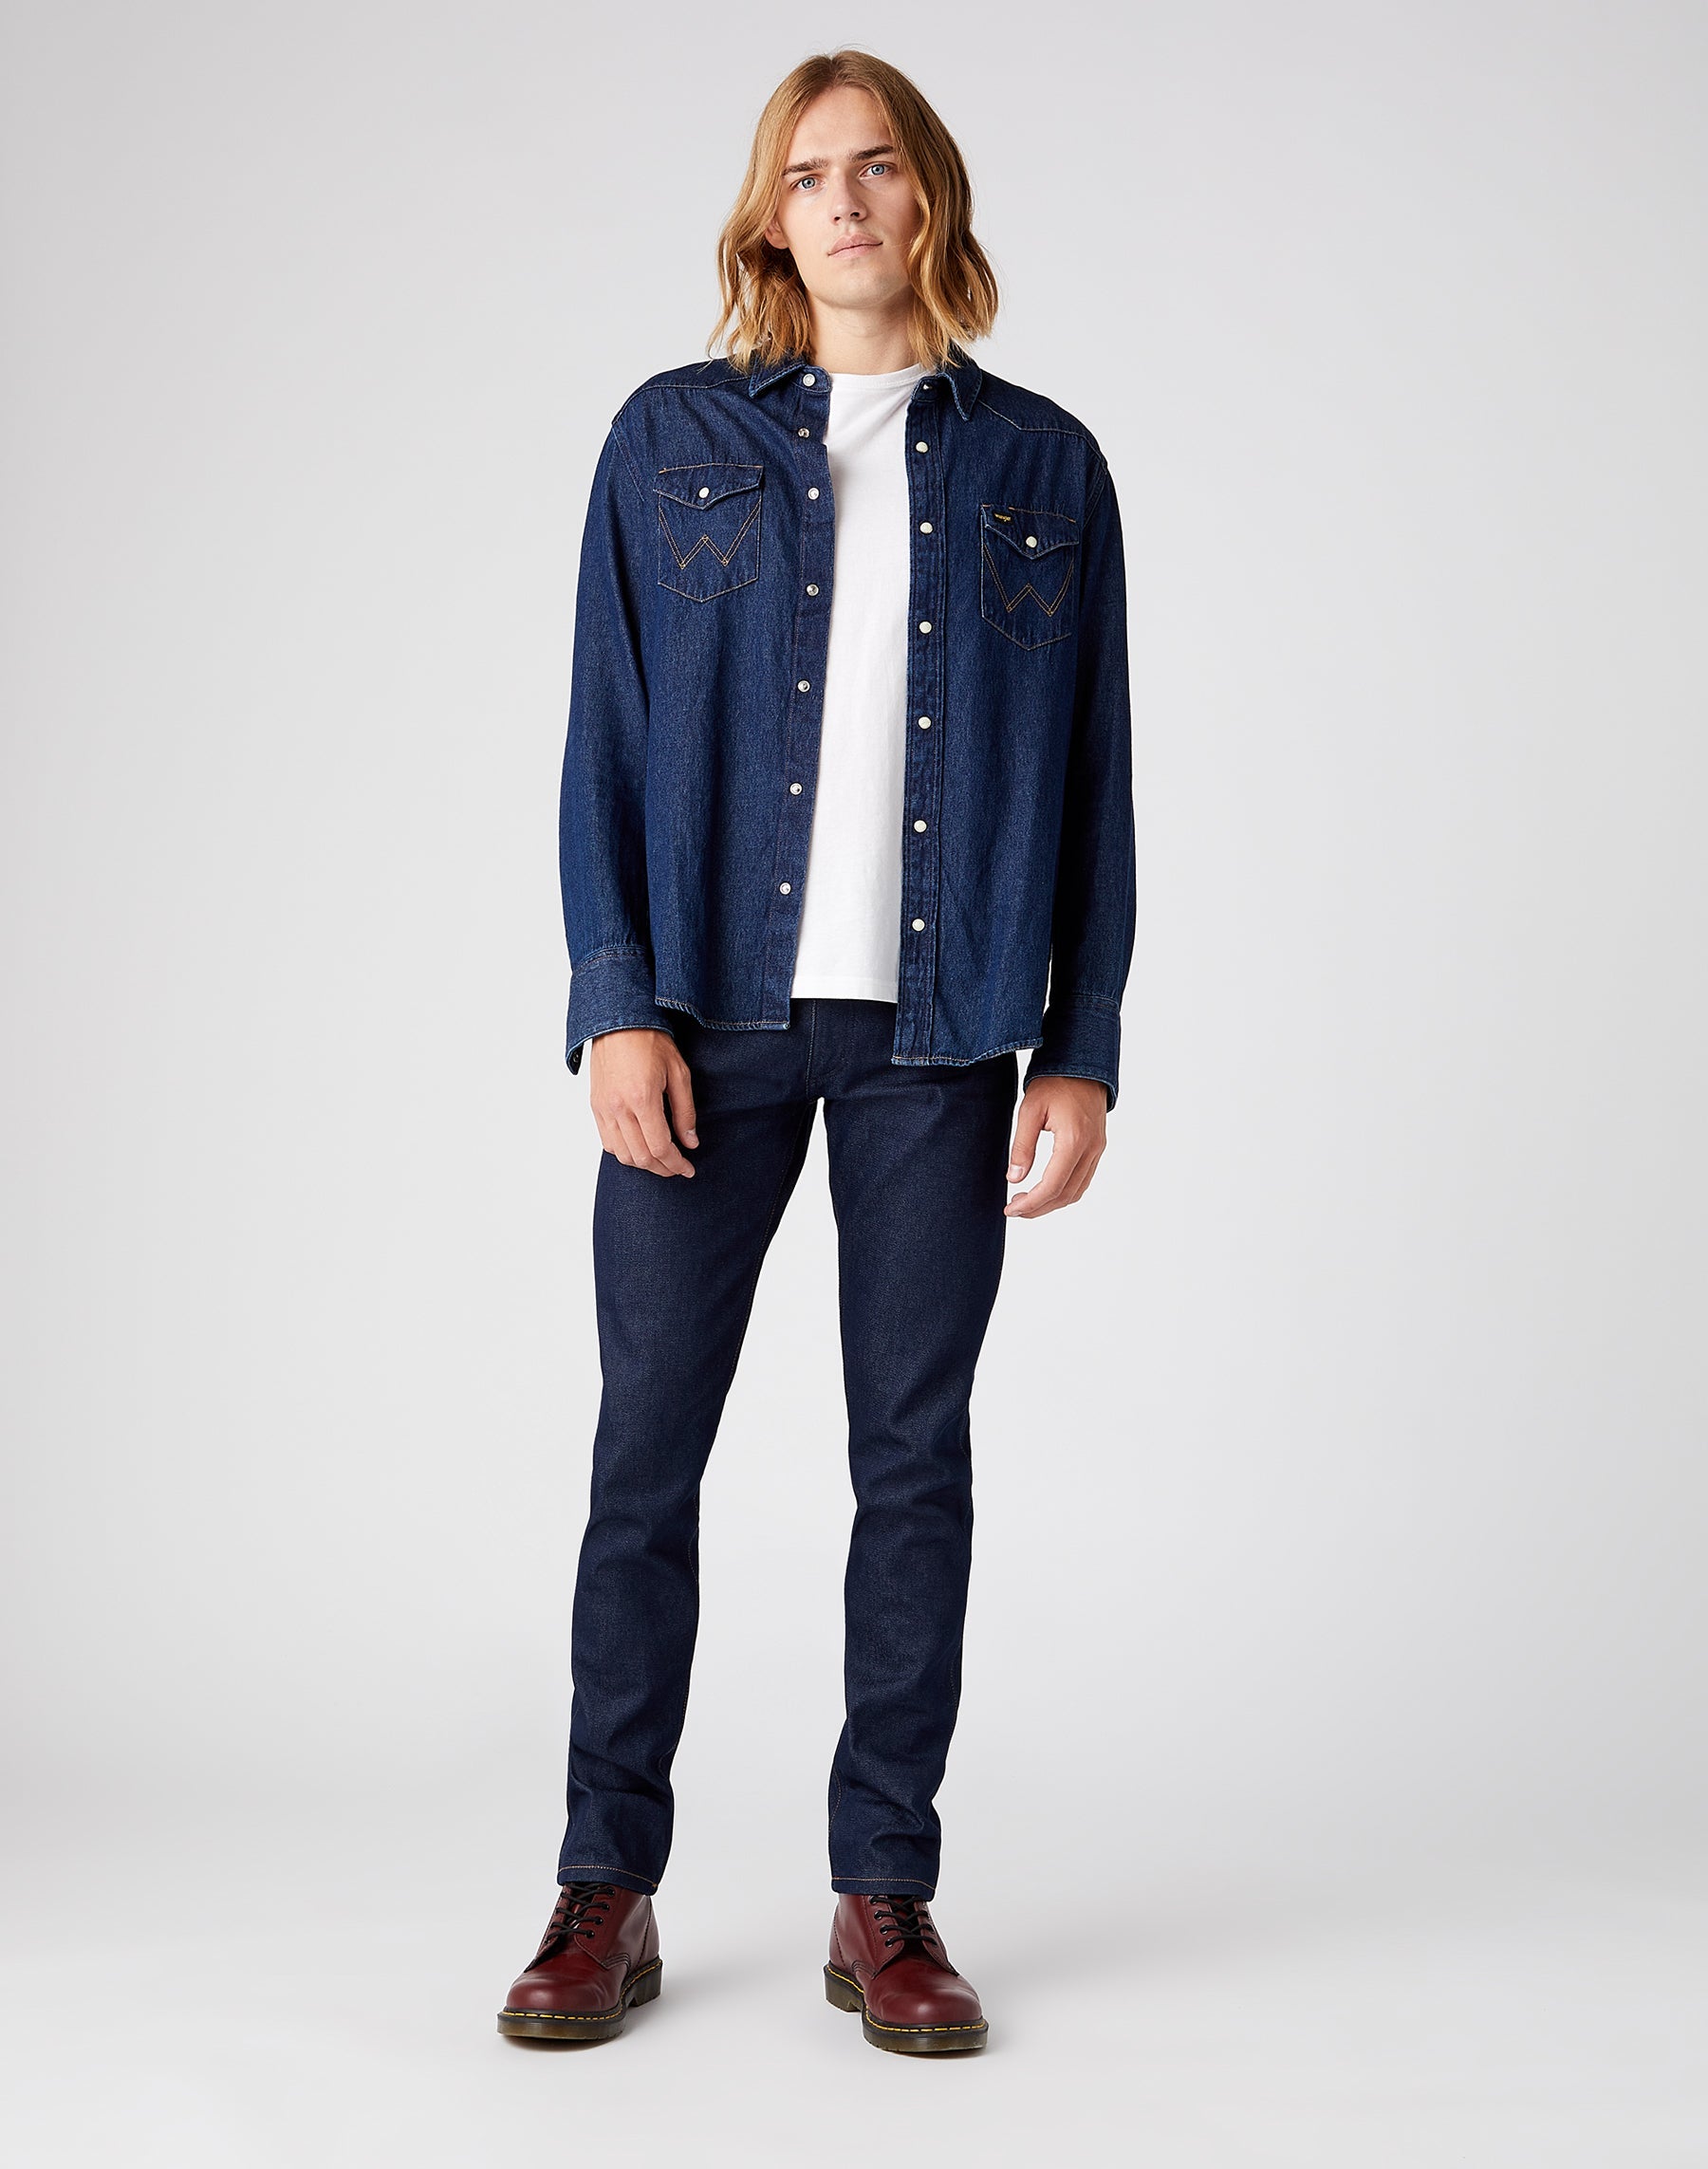 Icons 11MWZ Western Slim Jeans in New Jeans Wrangler   